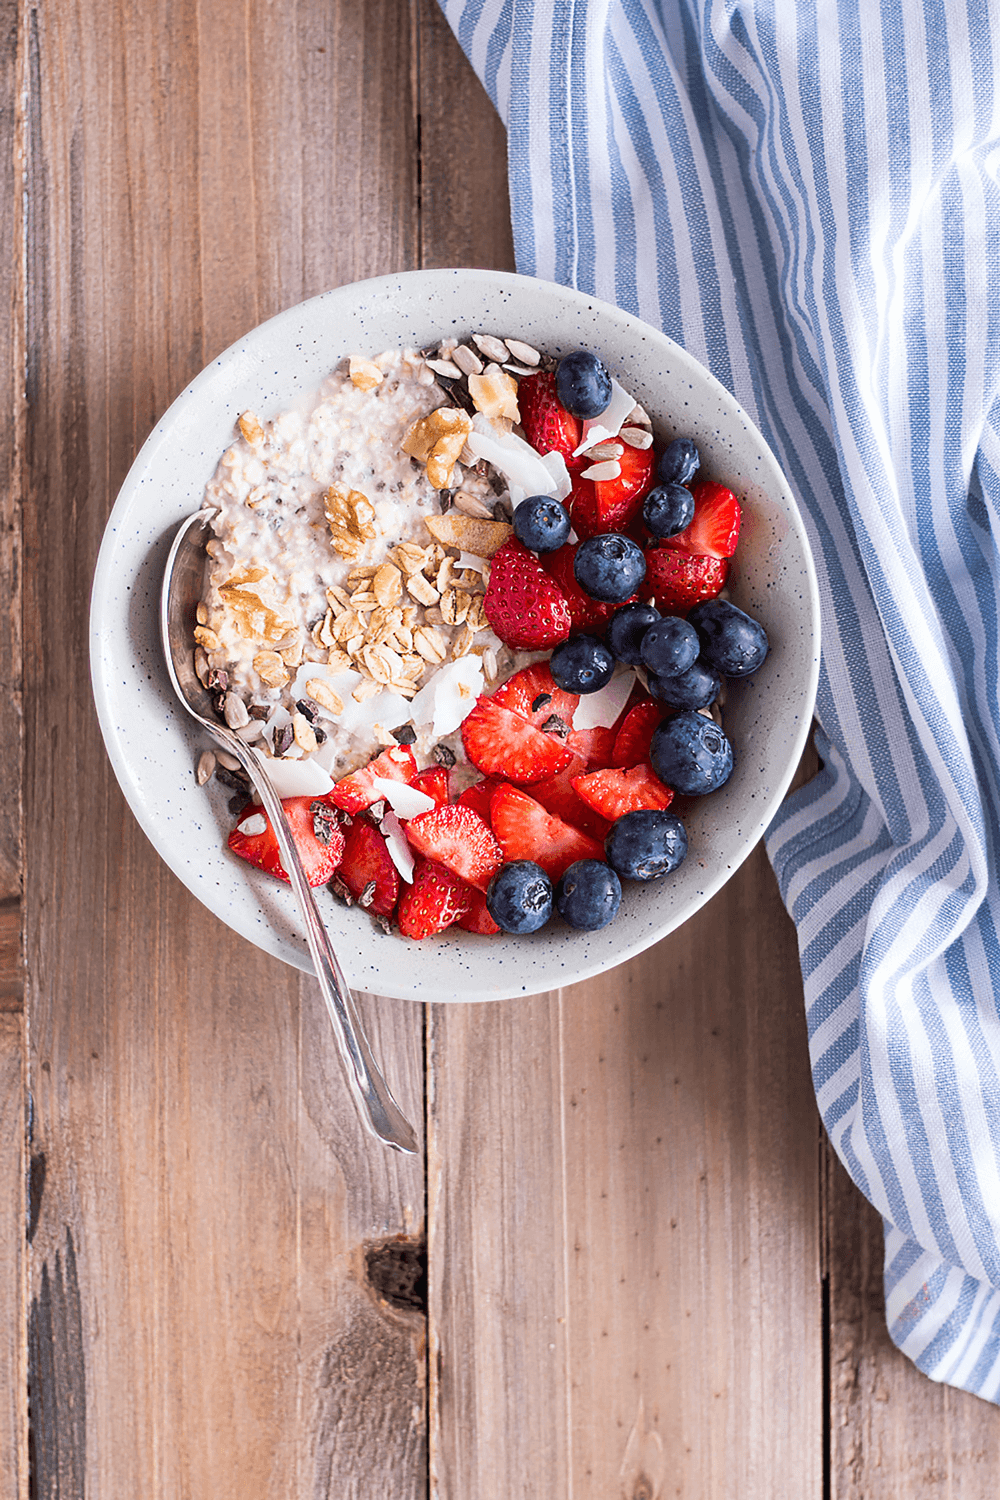 bowl of oats, strawberries, and blueberries